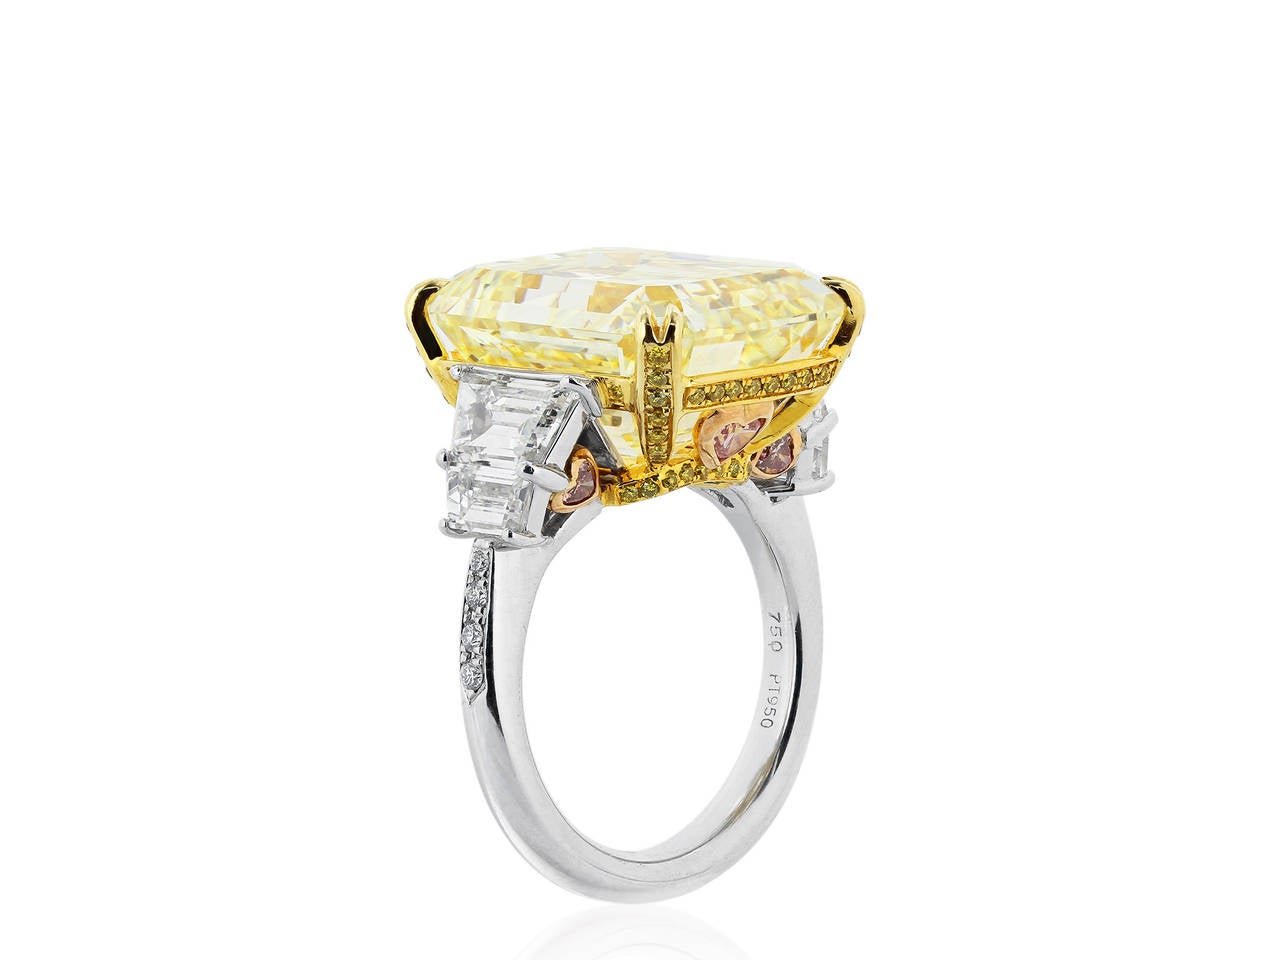 Tri tone platinum, 18 karat rose and yellow gold ring consisting of emerald cut natural canary diamond weighing 19.02 carats, measuring 17.52 x 13.59 x 9.01 mm, having a color and clarity of Fancy Yellow/VVS2 with GIA report 2165342391, flanked by 4